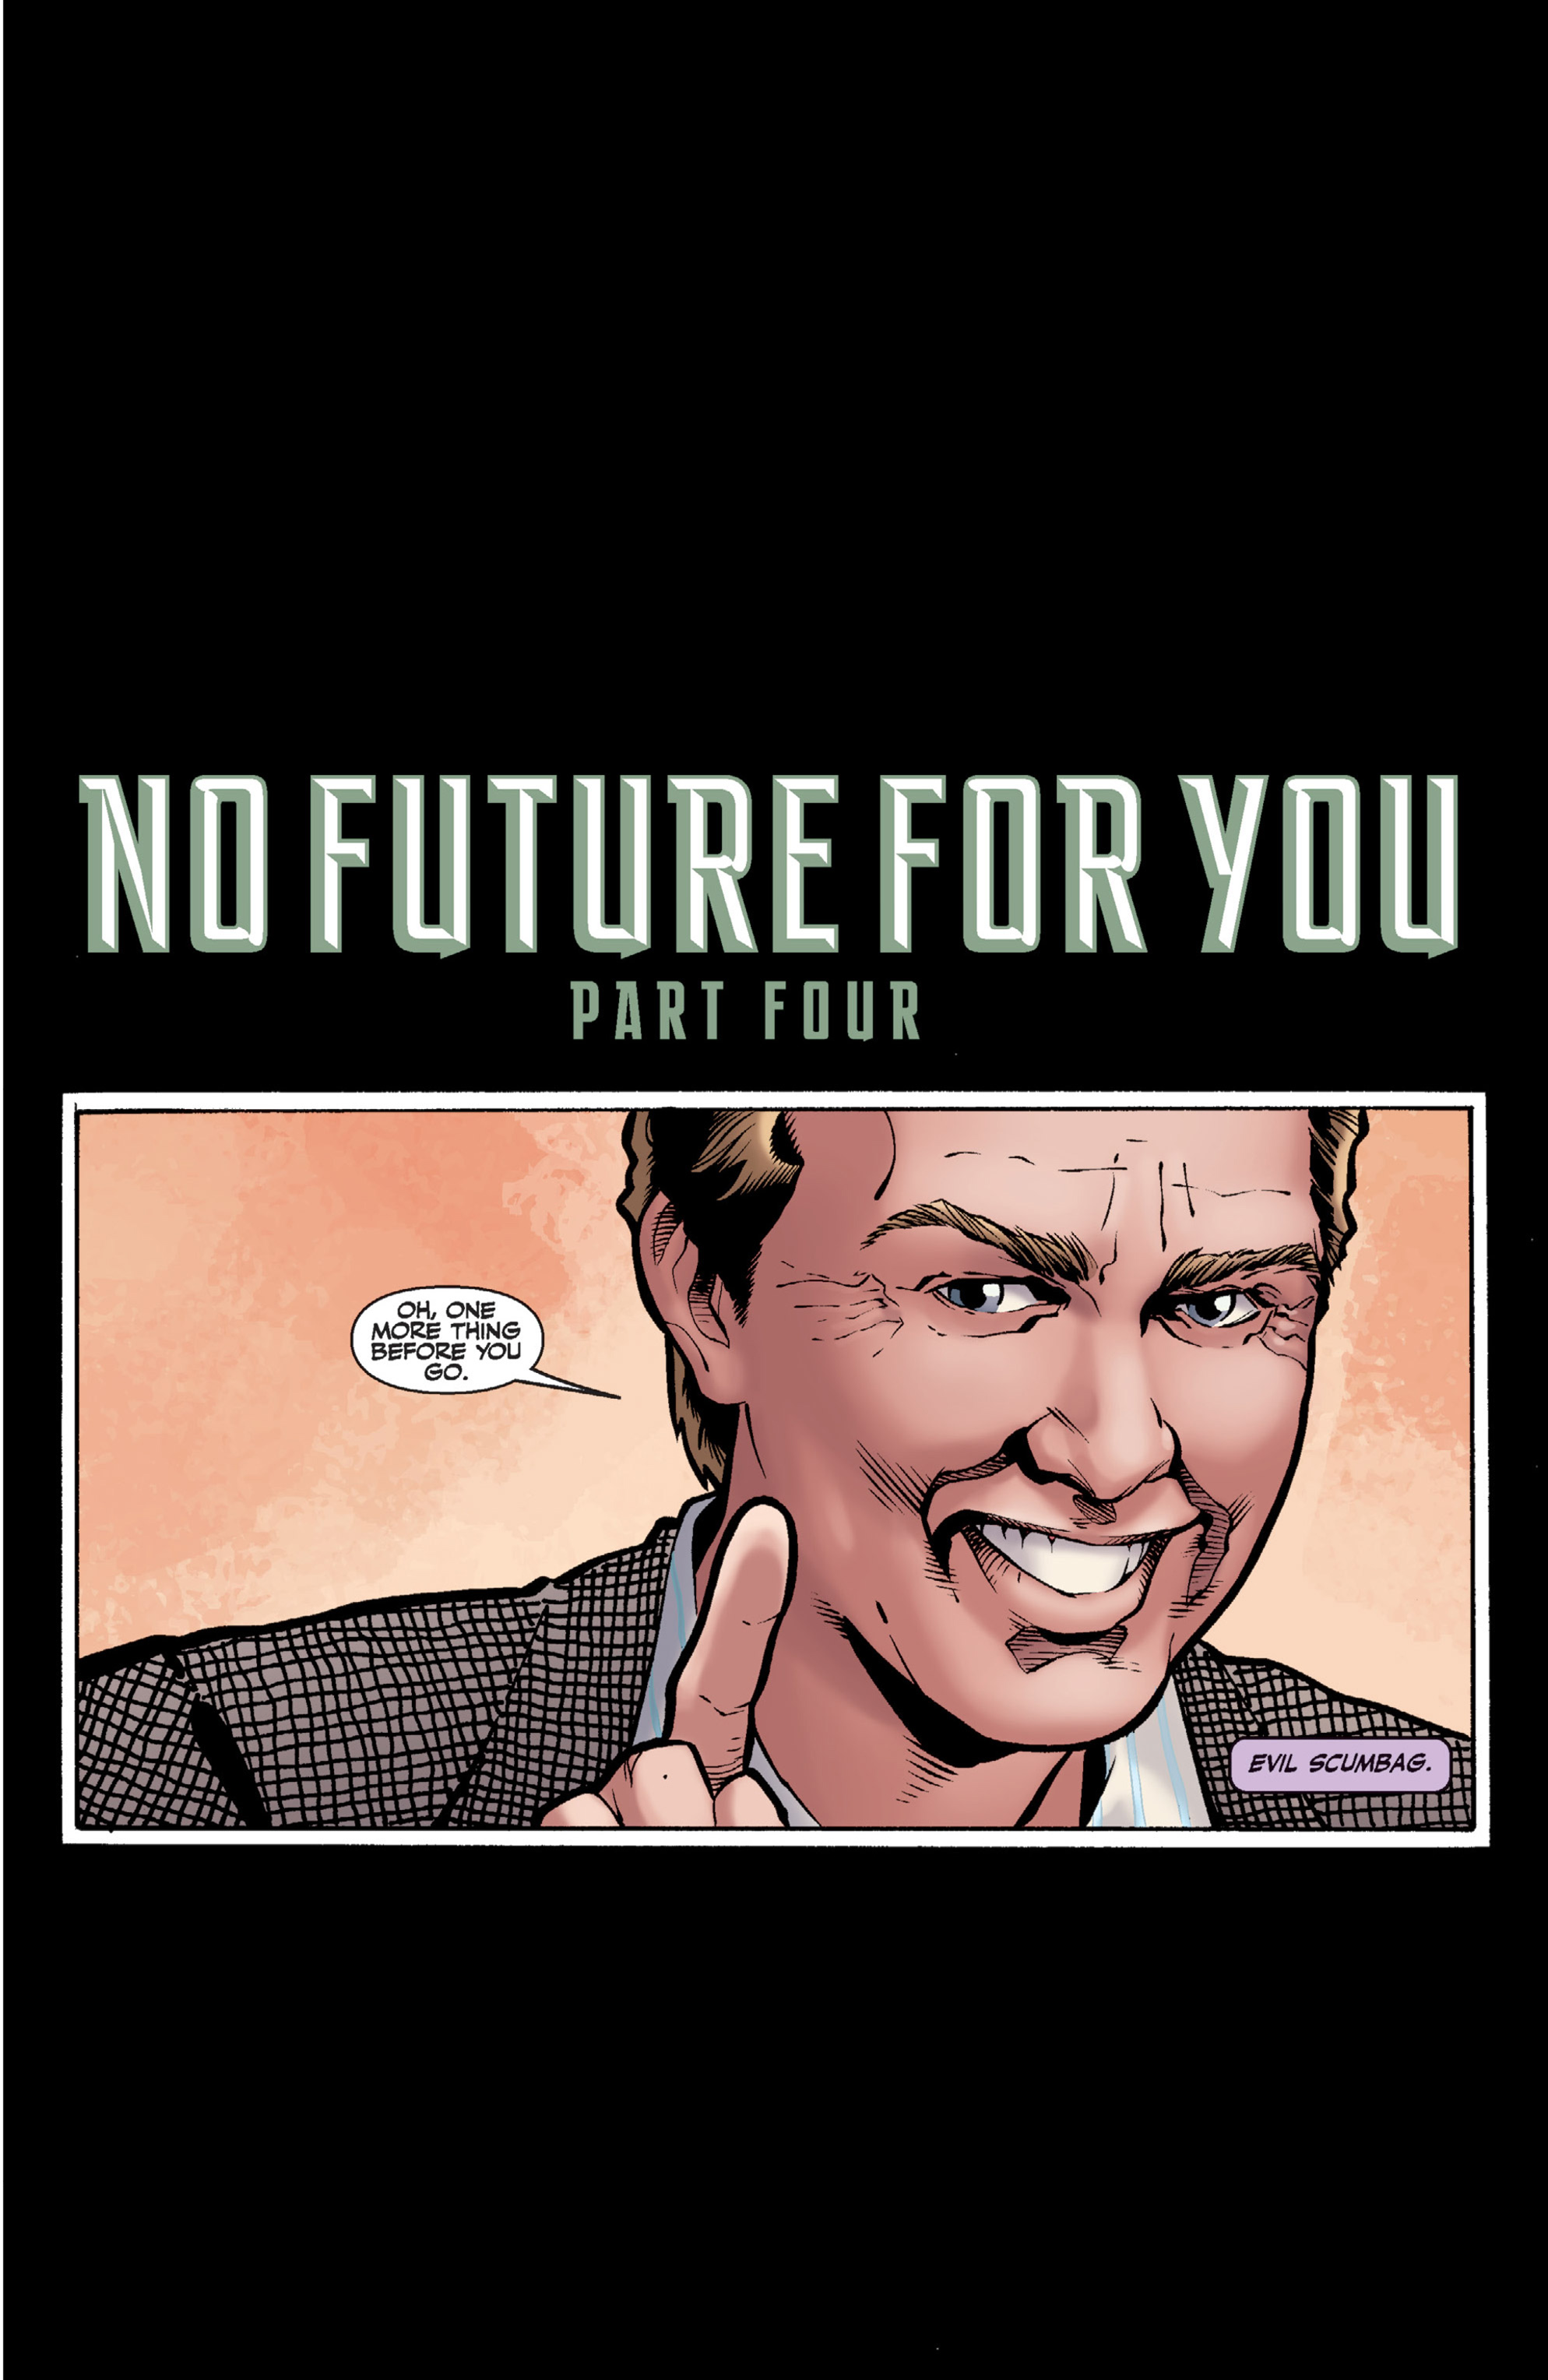 Read online Buffy the Vampire Slayer Season Eight comic -  Issue # _TPB 2 - No Future For You - 79